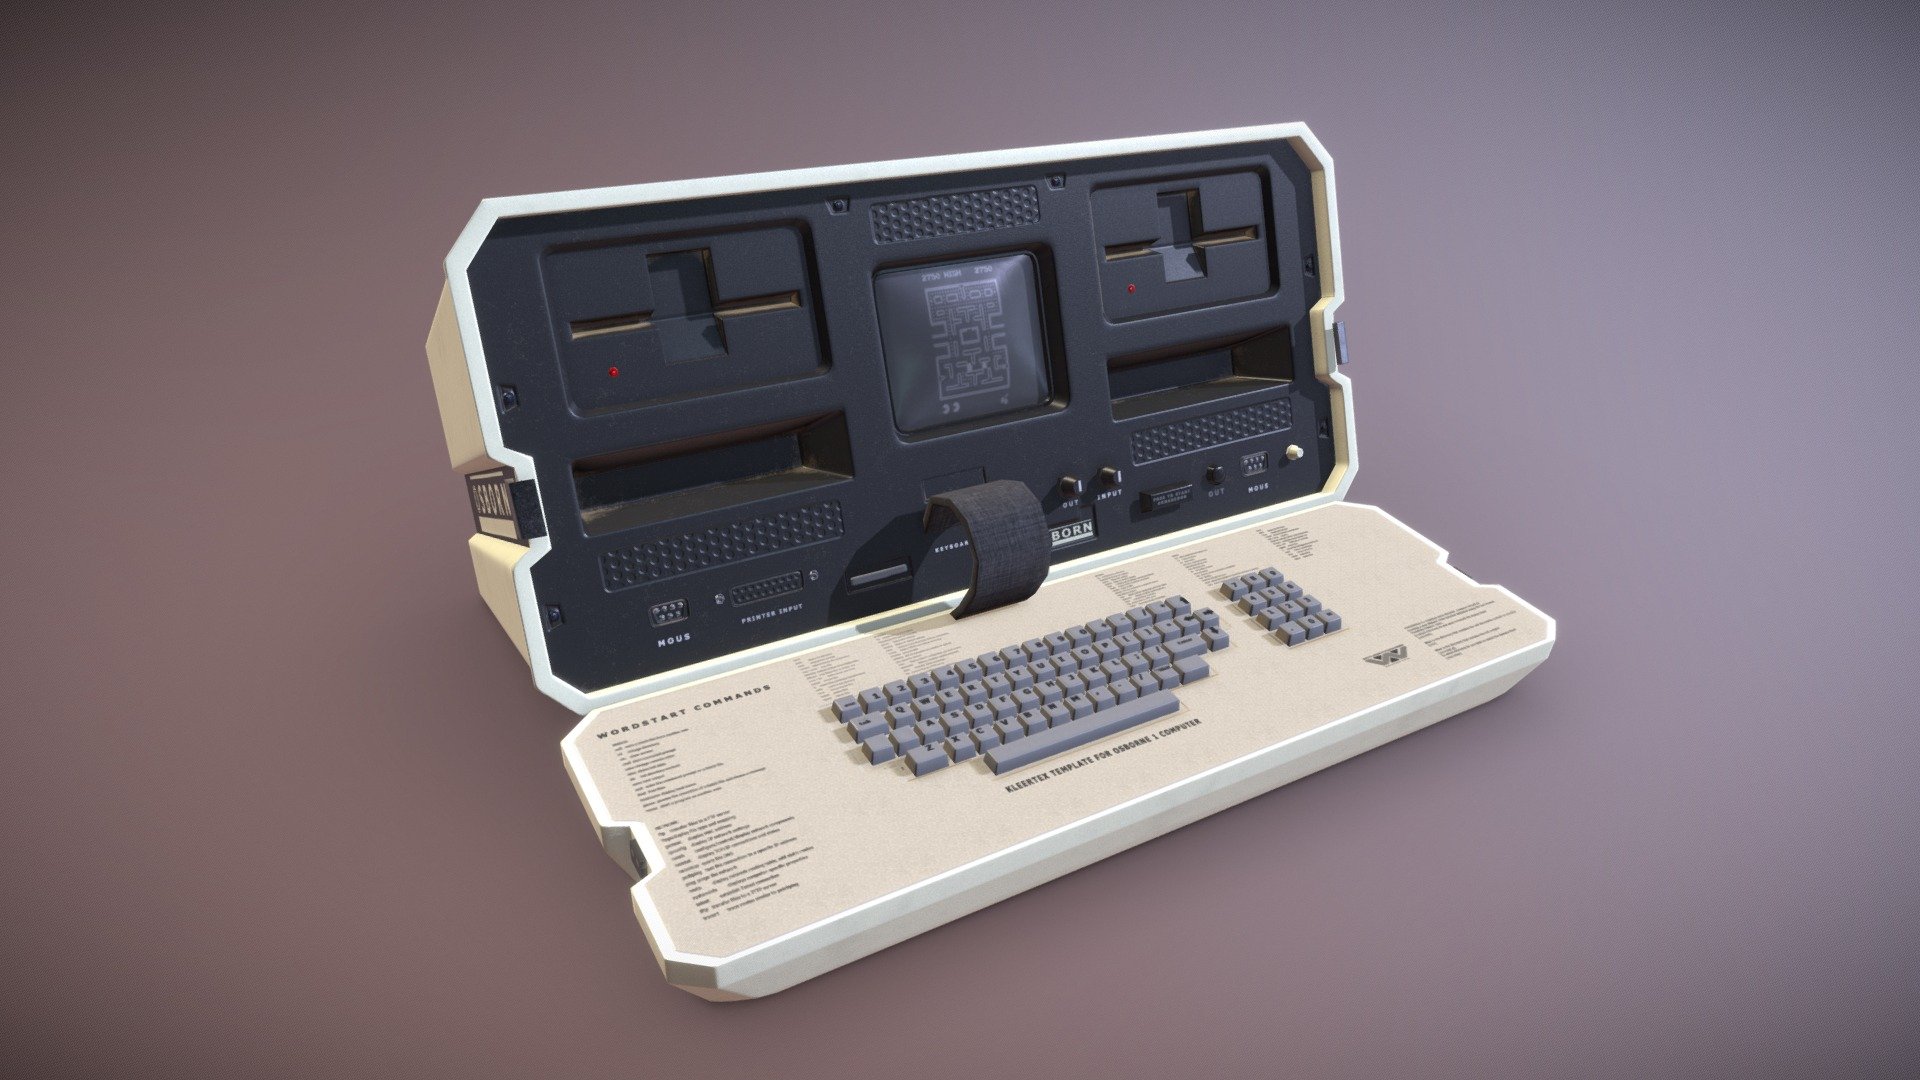 The Osborne 1 is the first commercially successful portable microcomputer, released on April 3, 1981 by Osborne Computer Corporation. It weighs 10.7 kg (24.5 lb), cost US$1,795, and runs the CP/M 2.2 operating system. It is powered from a wall socket, as it has no on-board battery, but it is still classed as a portable device since it can be hand-carried when packed.

The computer shipped with a large bundle of software that was almost equivalent in value to the machine itself, a practice adopted by other CP/M computer vendors. Competitors quickly appeared, such as the Kaypro II 3d model